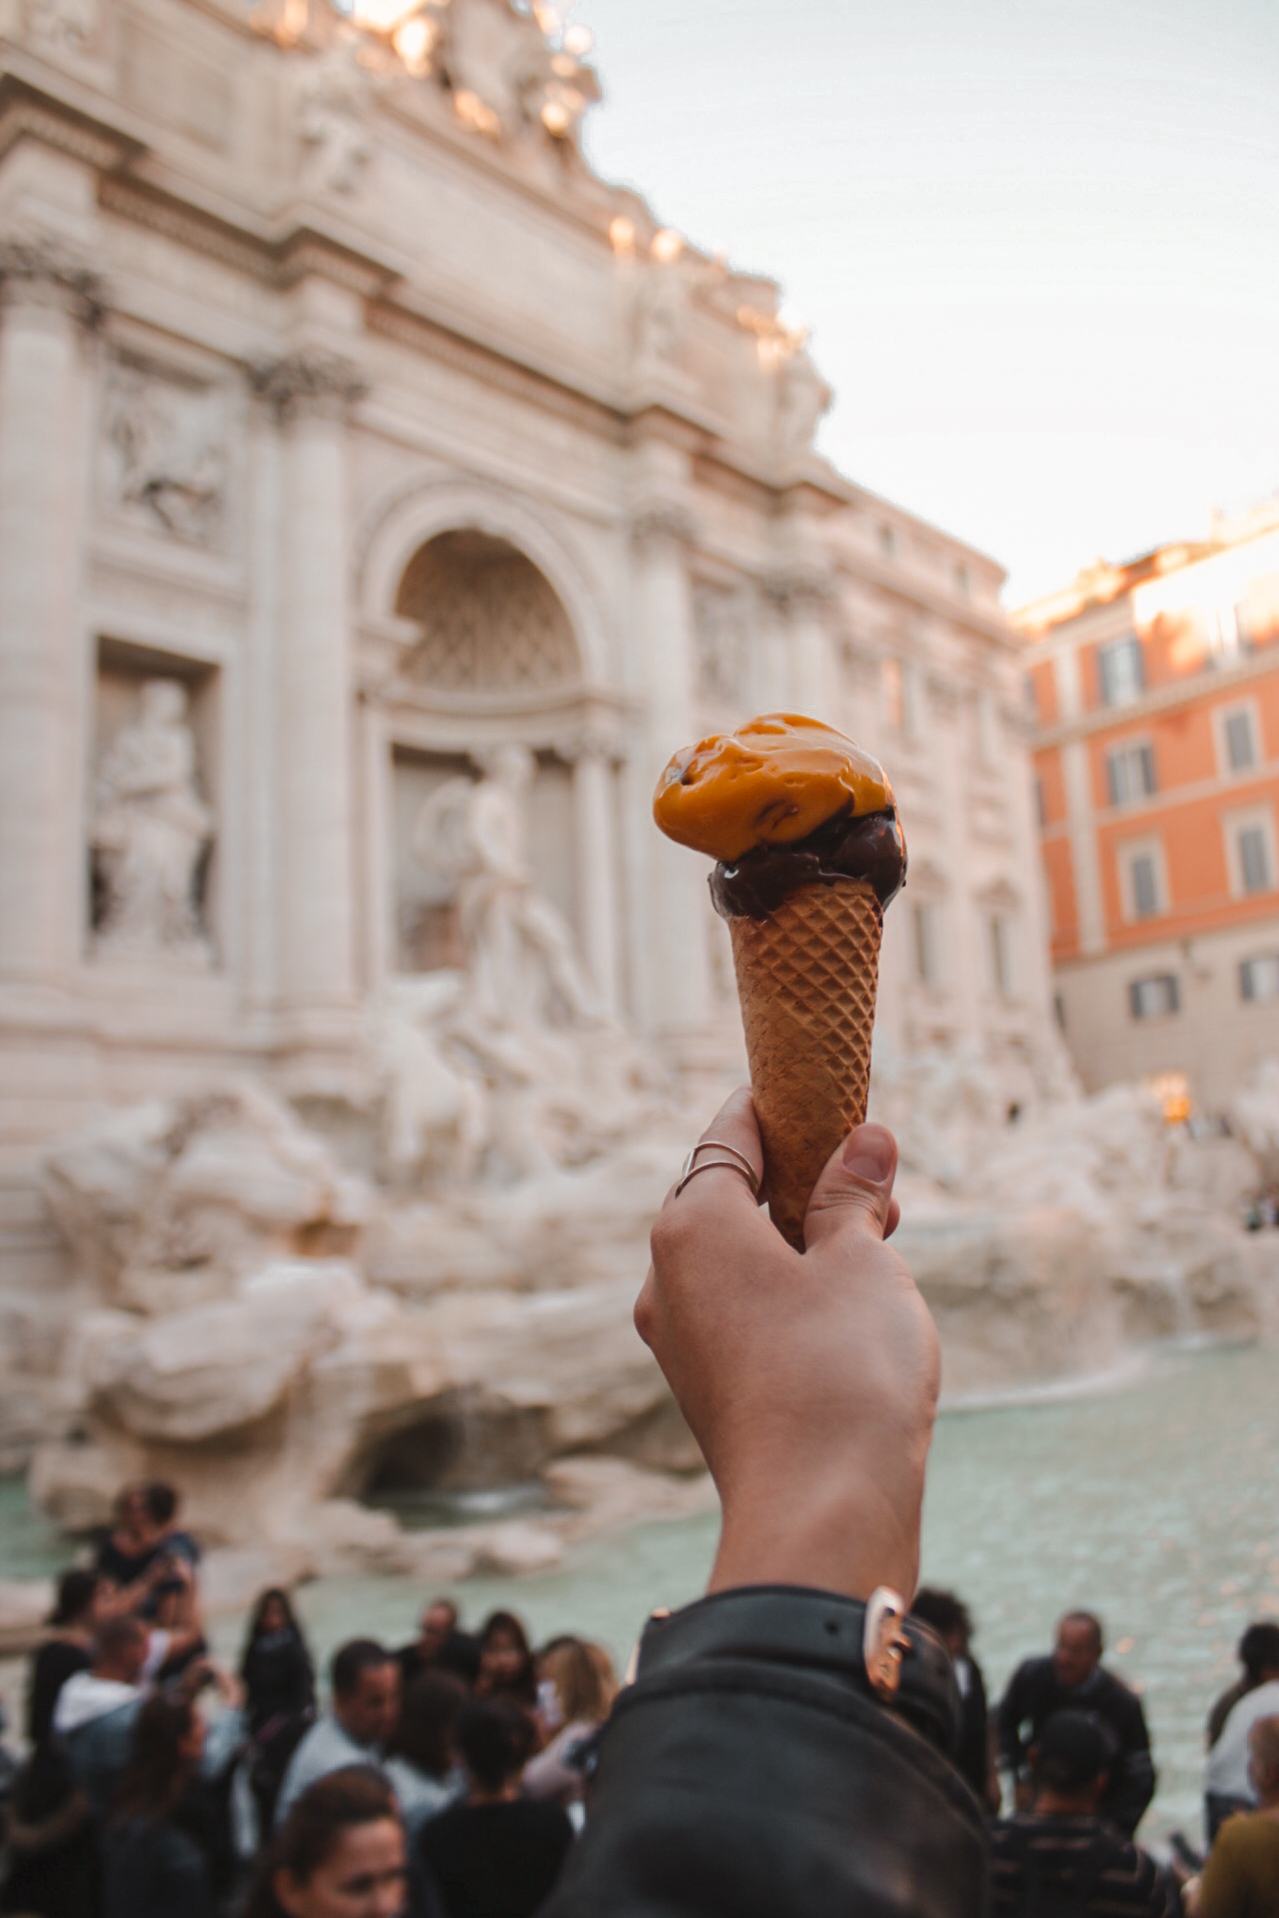 Where to Stay, Play, and Eat in Rome | lifestyletraveler.co | IG: @lifestyletraveler.co